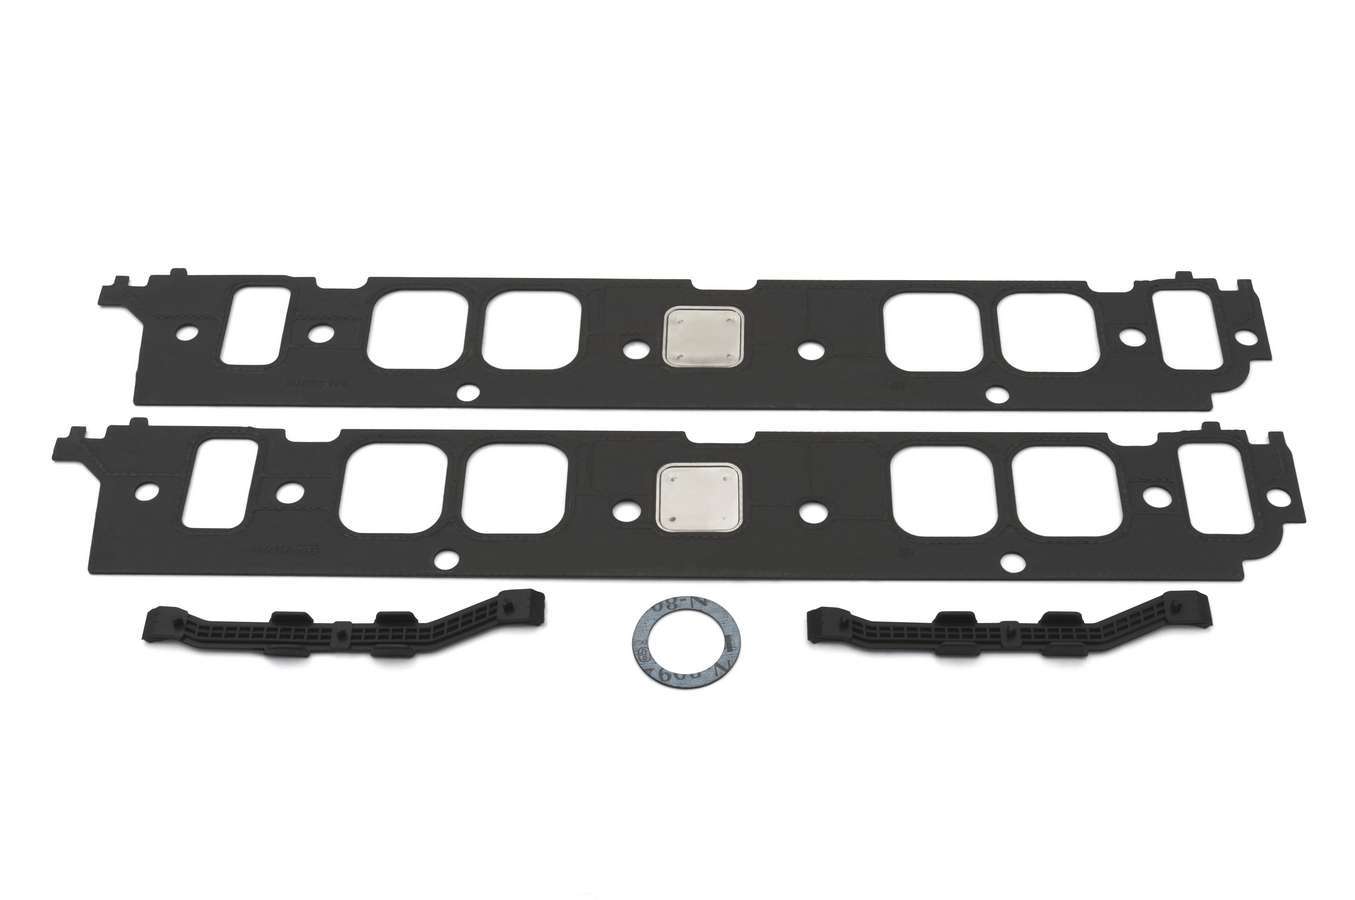 GM Performance, Intake Manifold Gasket,  Composite,  1.820 x 2.050" Oval Port,  Big Block Chevy,  Pair